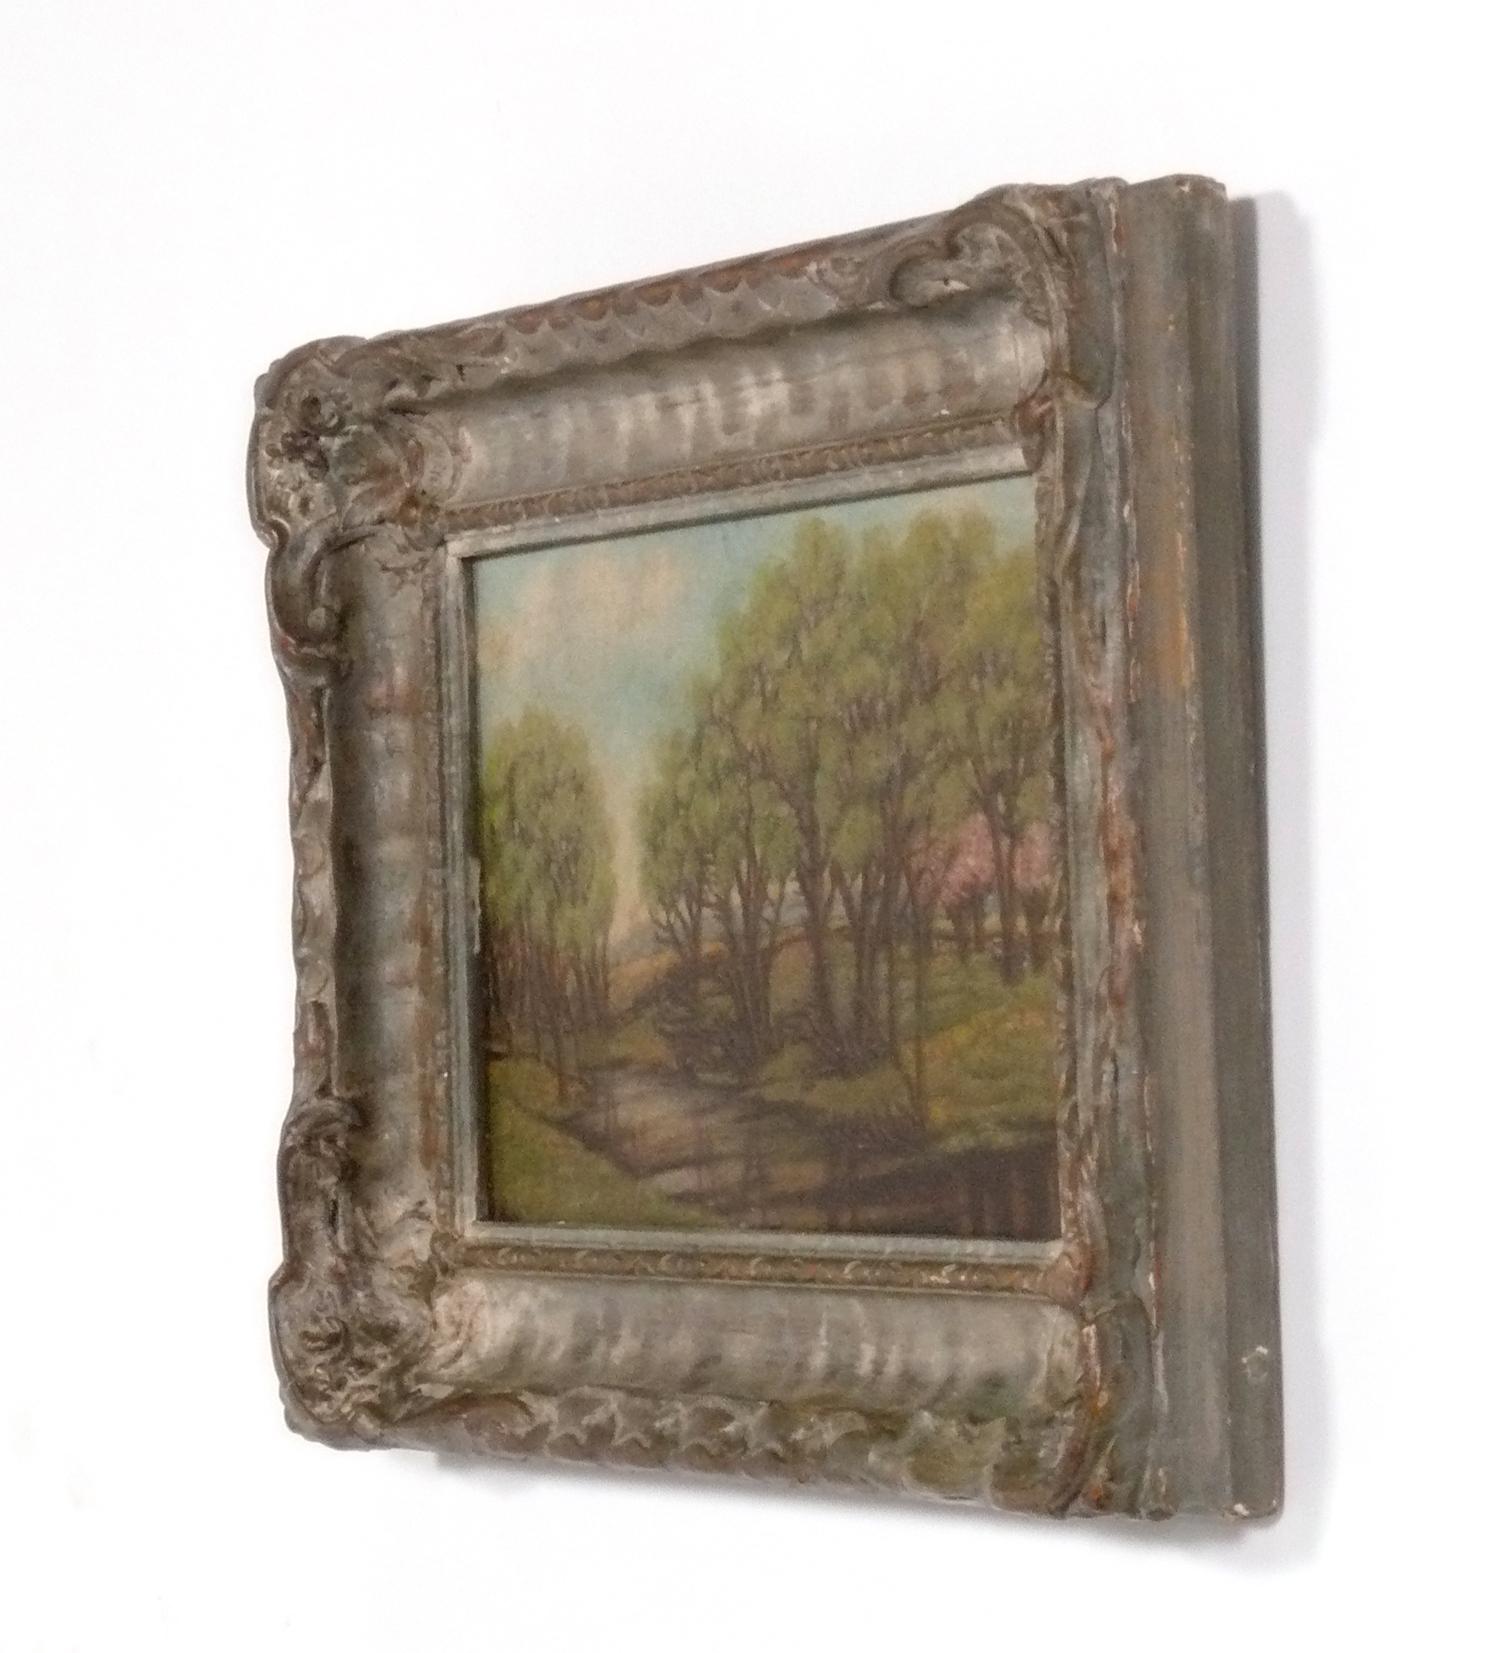 Original Landscape Painting on board by Olive Parker Black, American, circa late 19th - early 20th Century. It measures 14